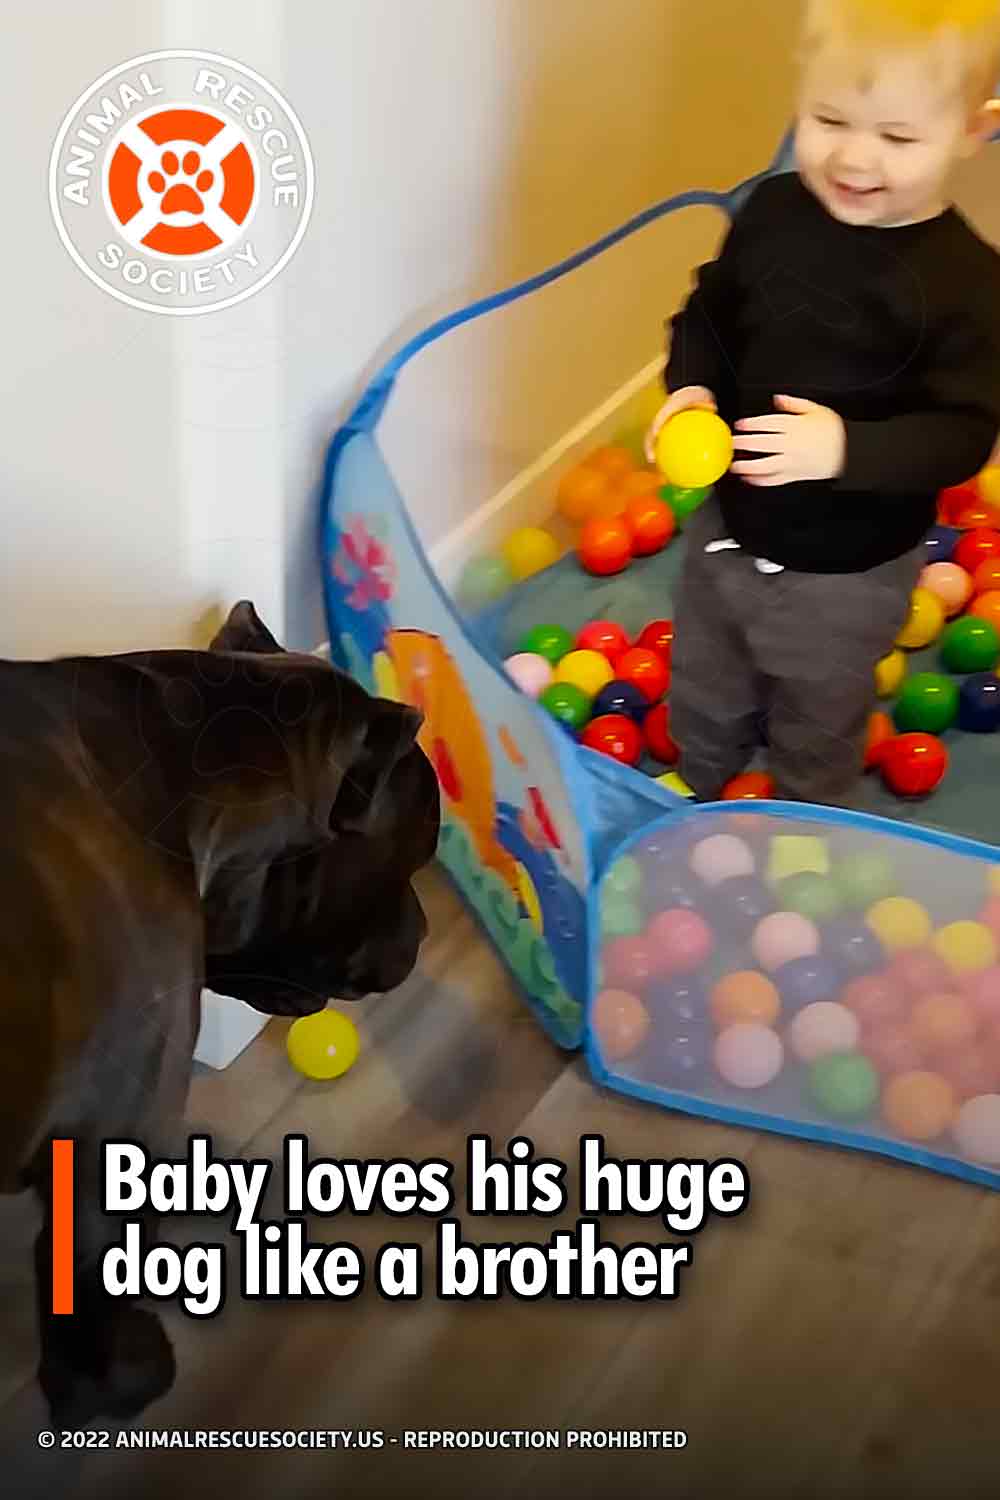 Baby loves his huge dog like a brother